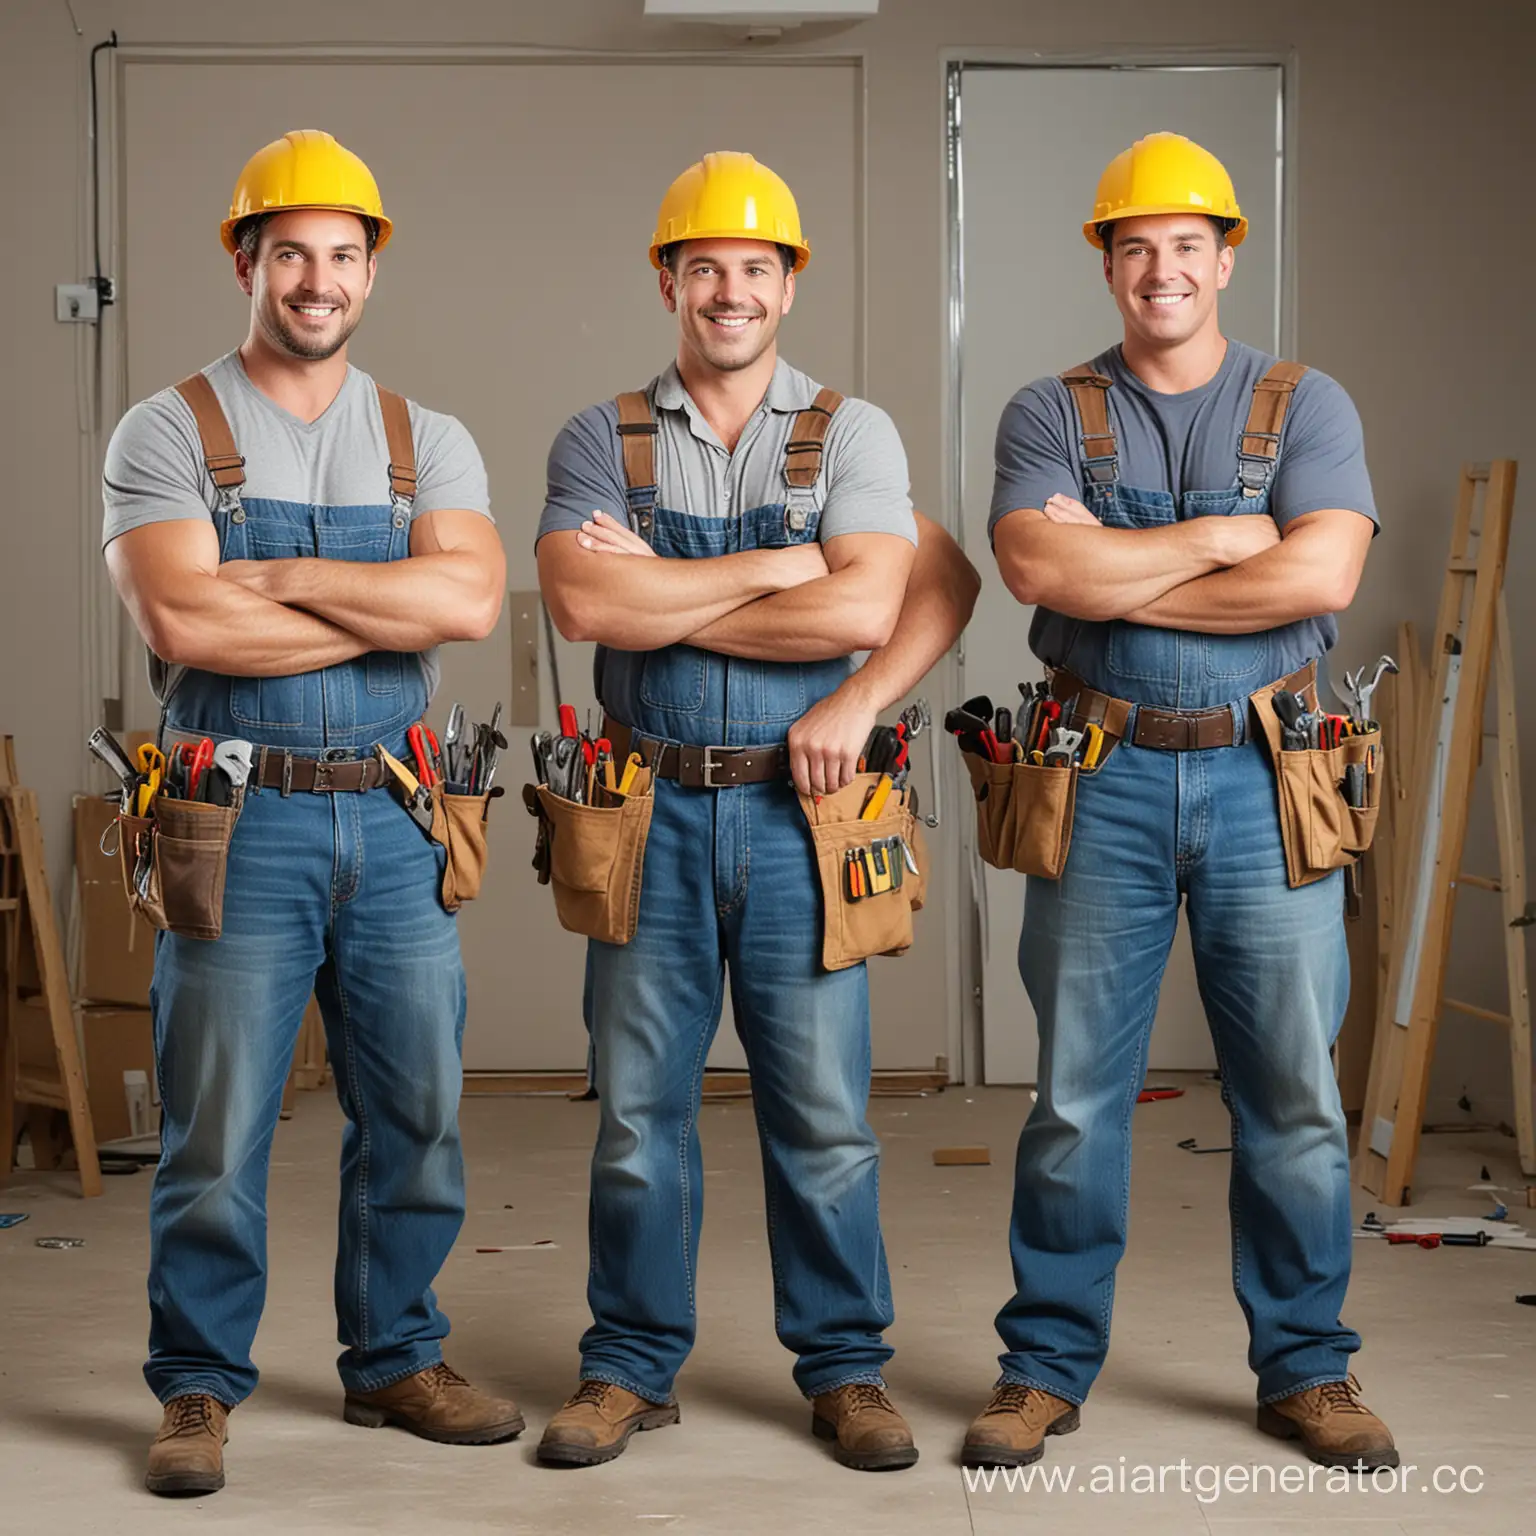 Three-Handyman-Working-Together-on-Home-Renovation-Project